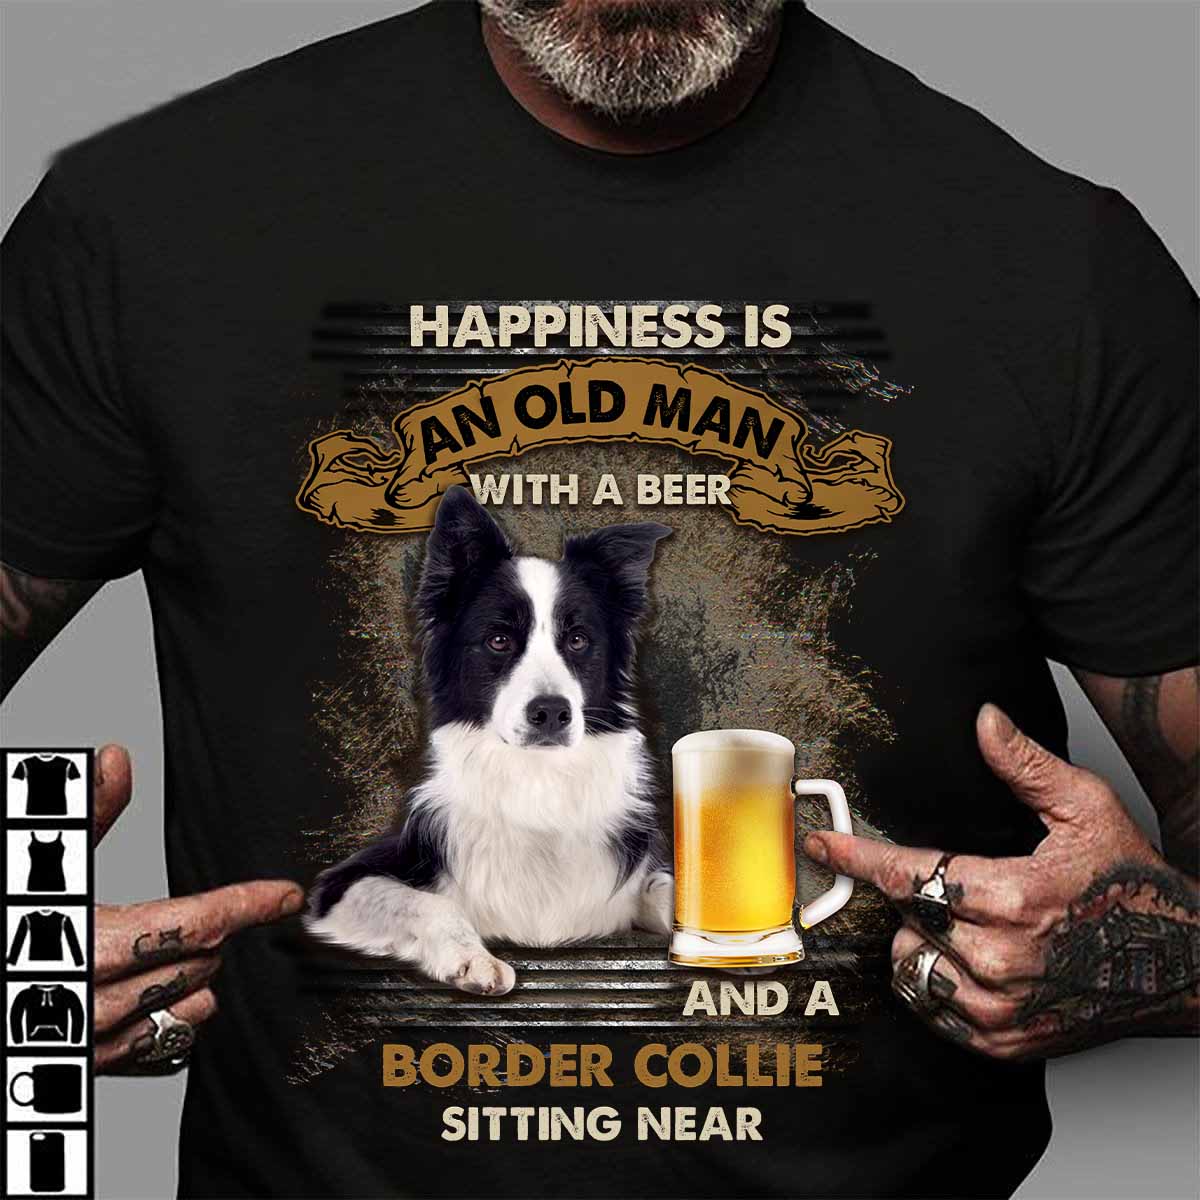 Border Collie Beer - Happiness is an old man with a beer and a